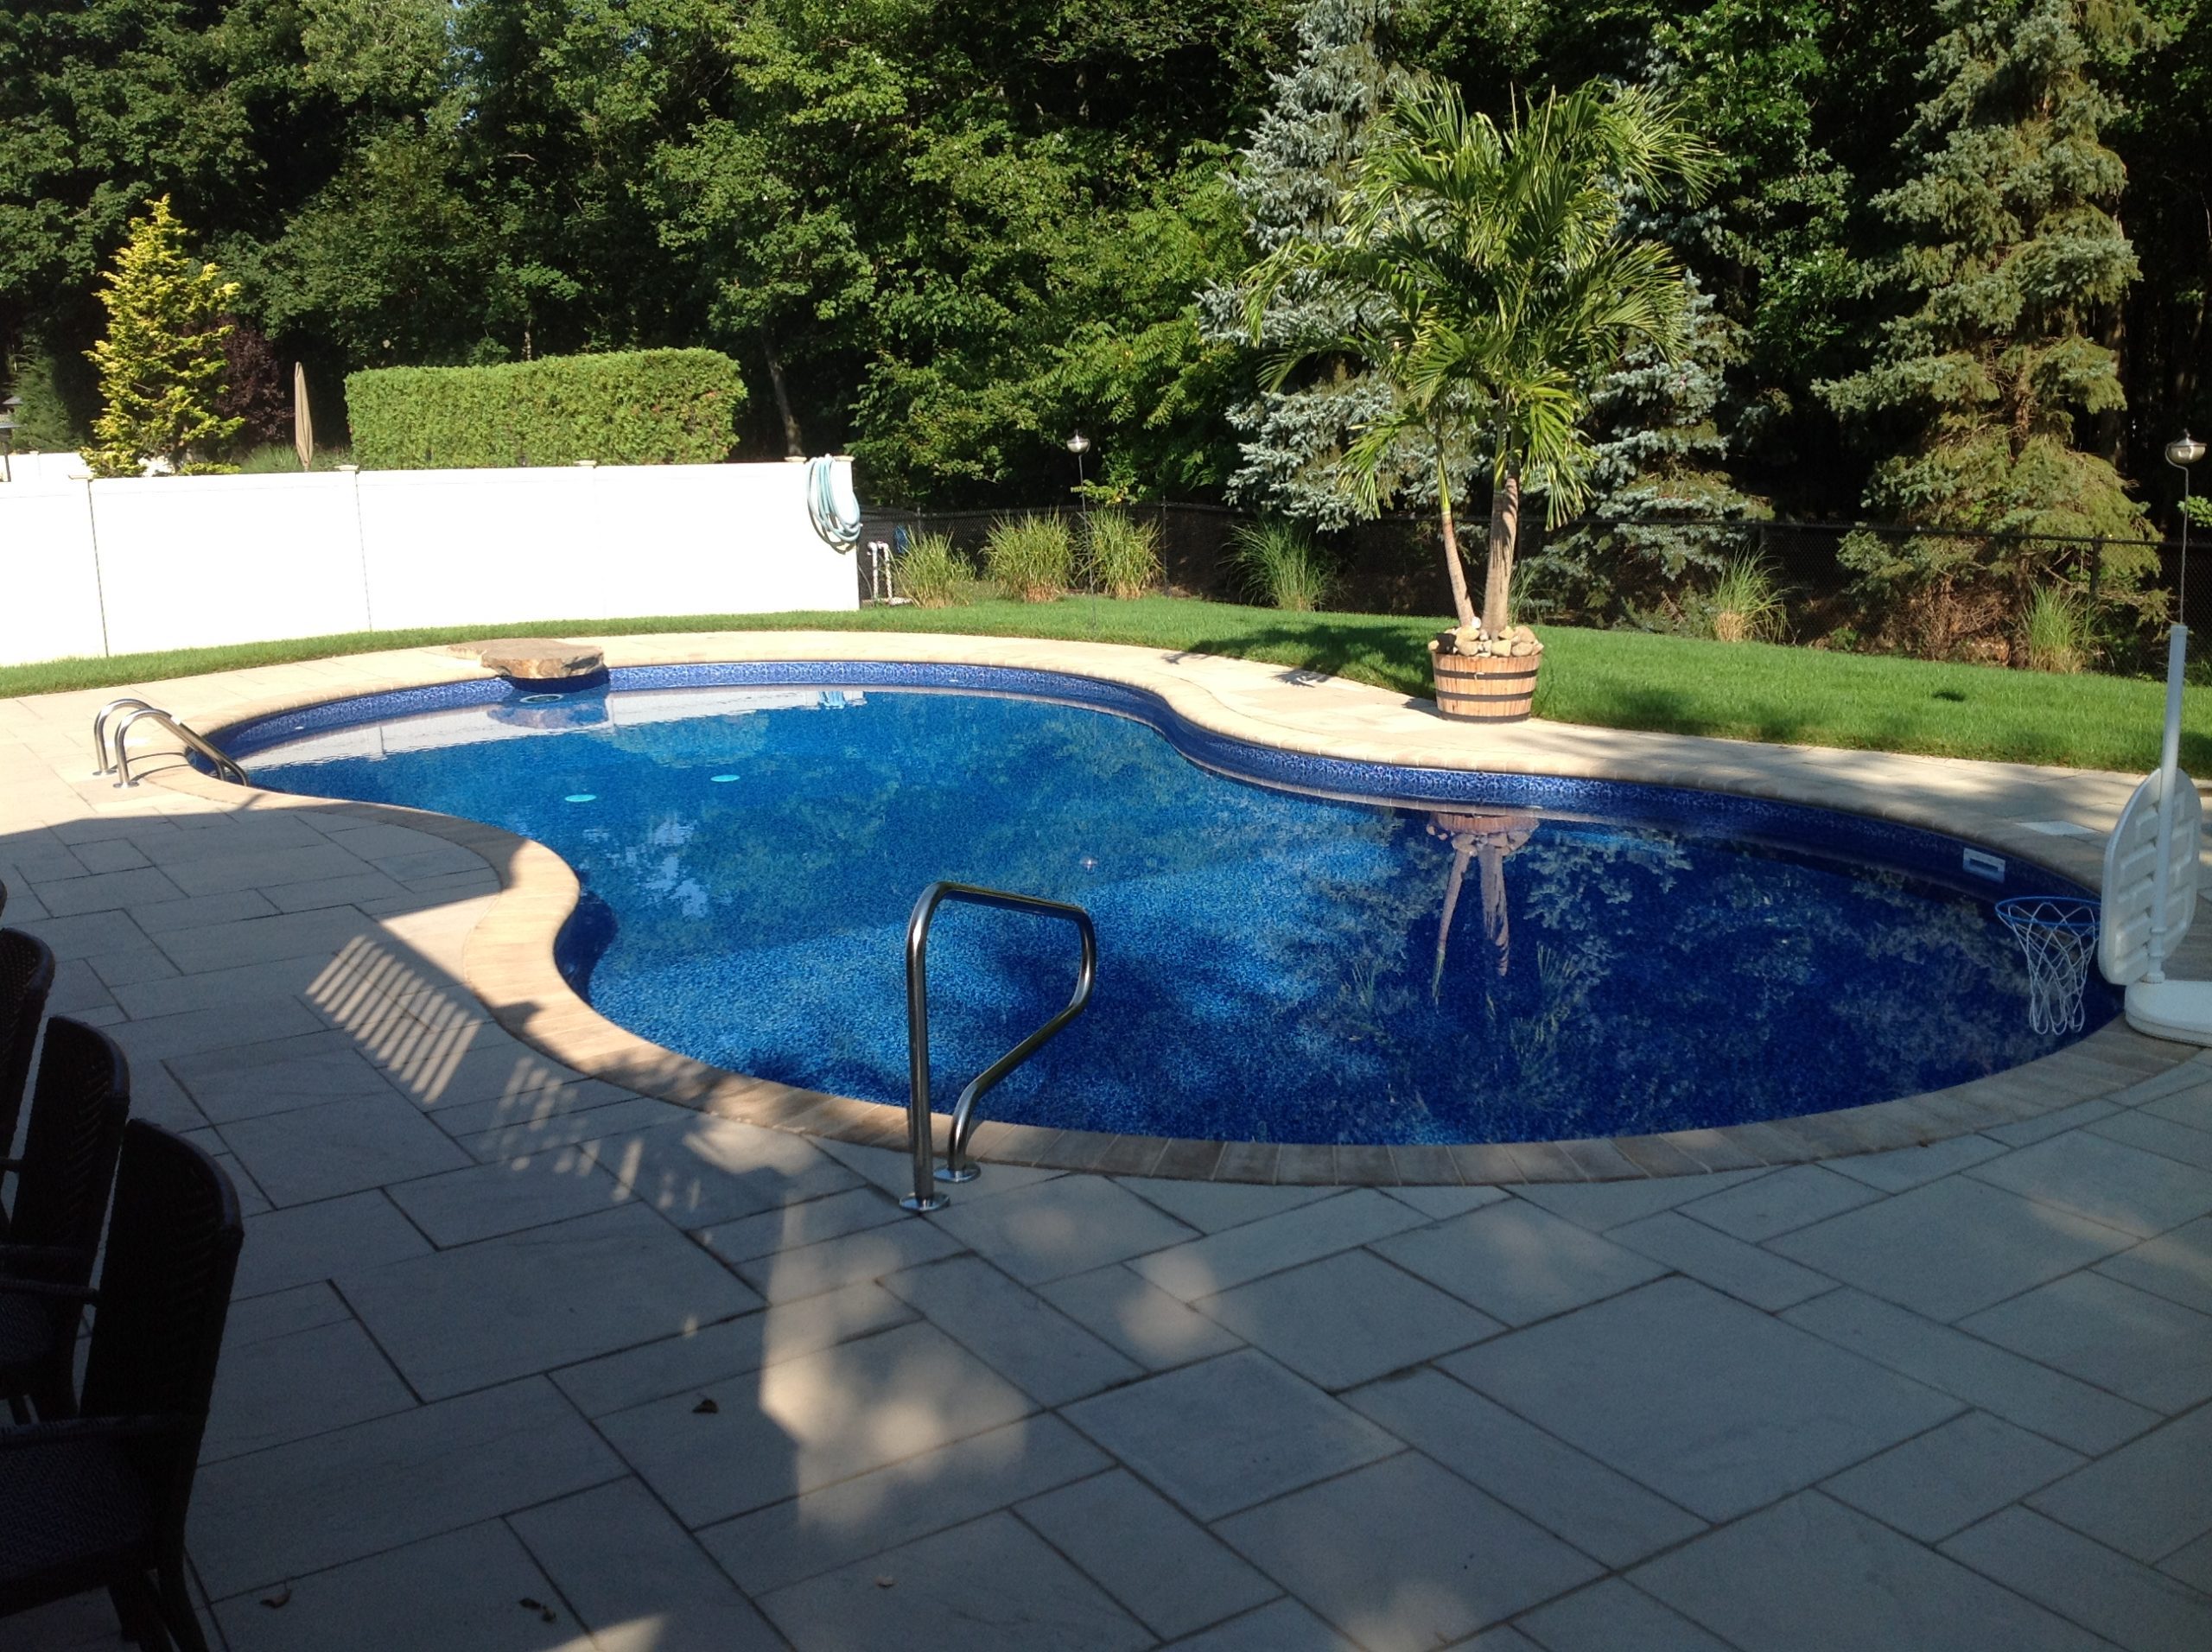 Poolscape - After